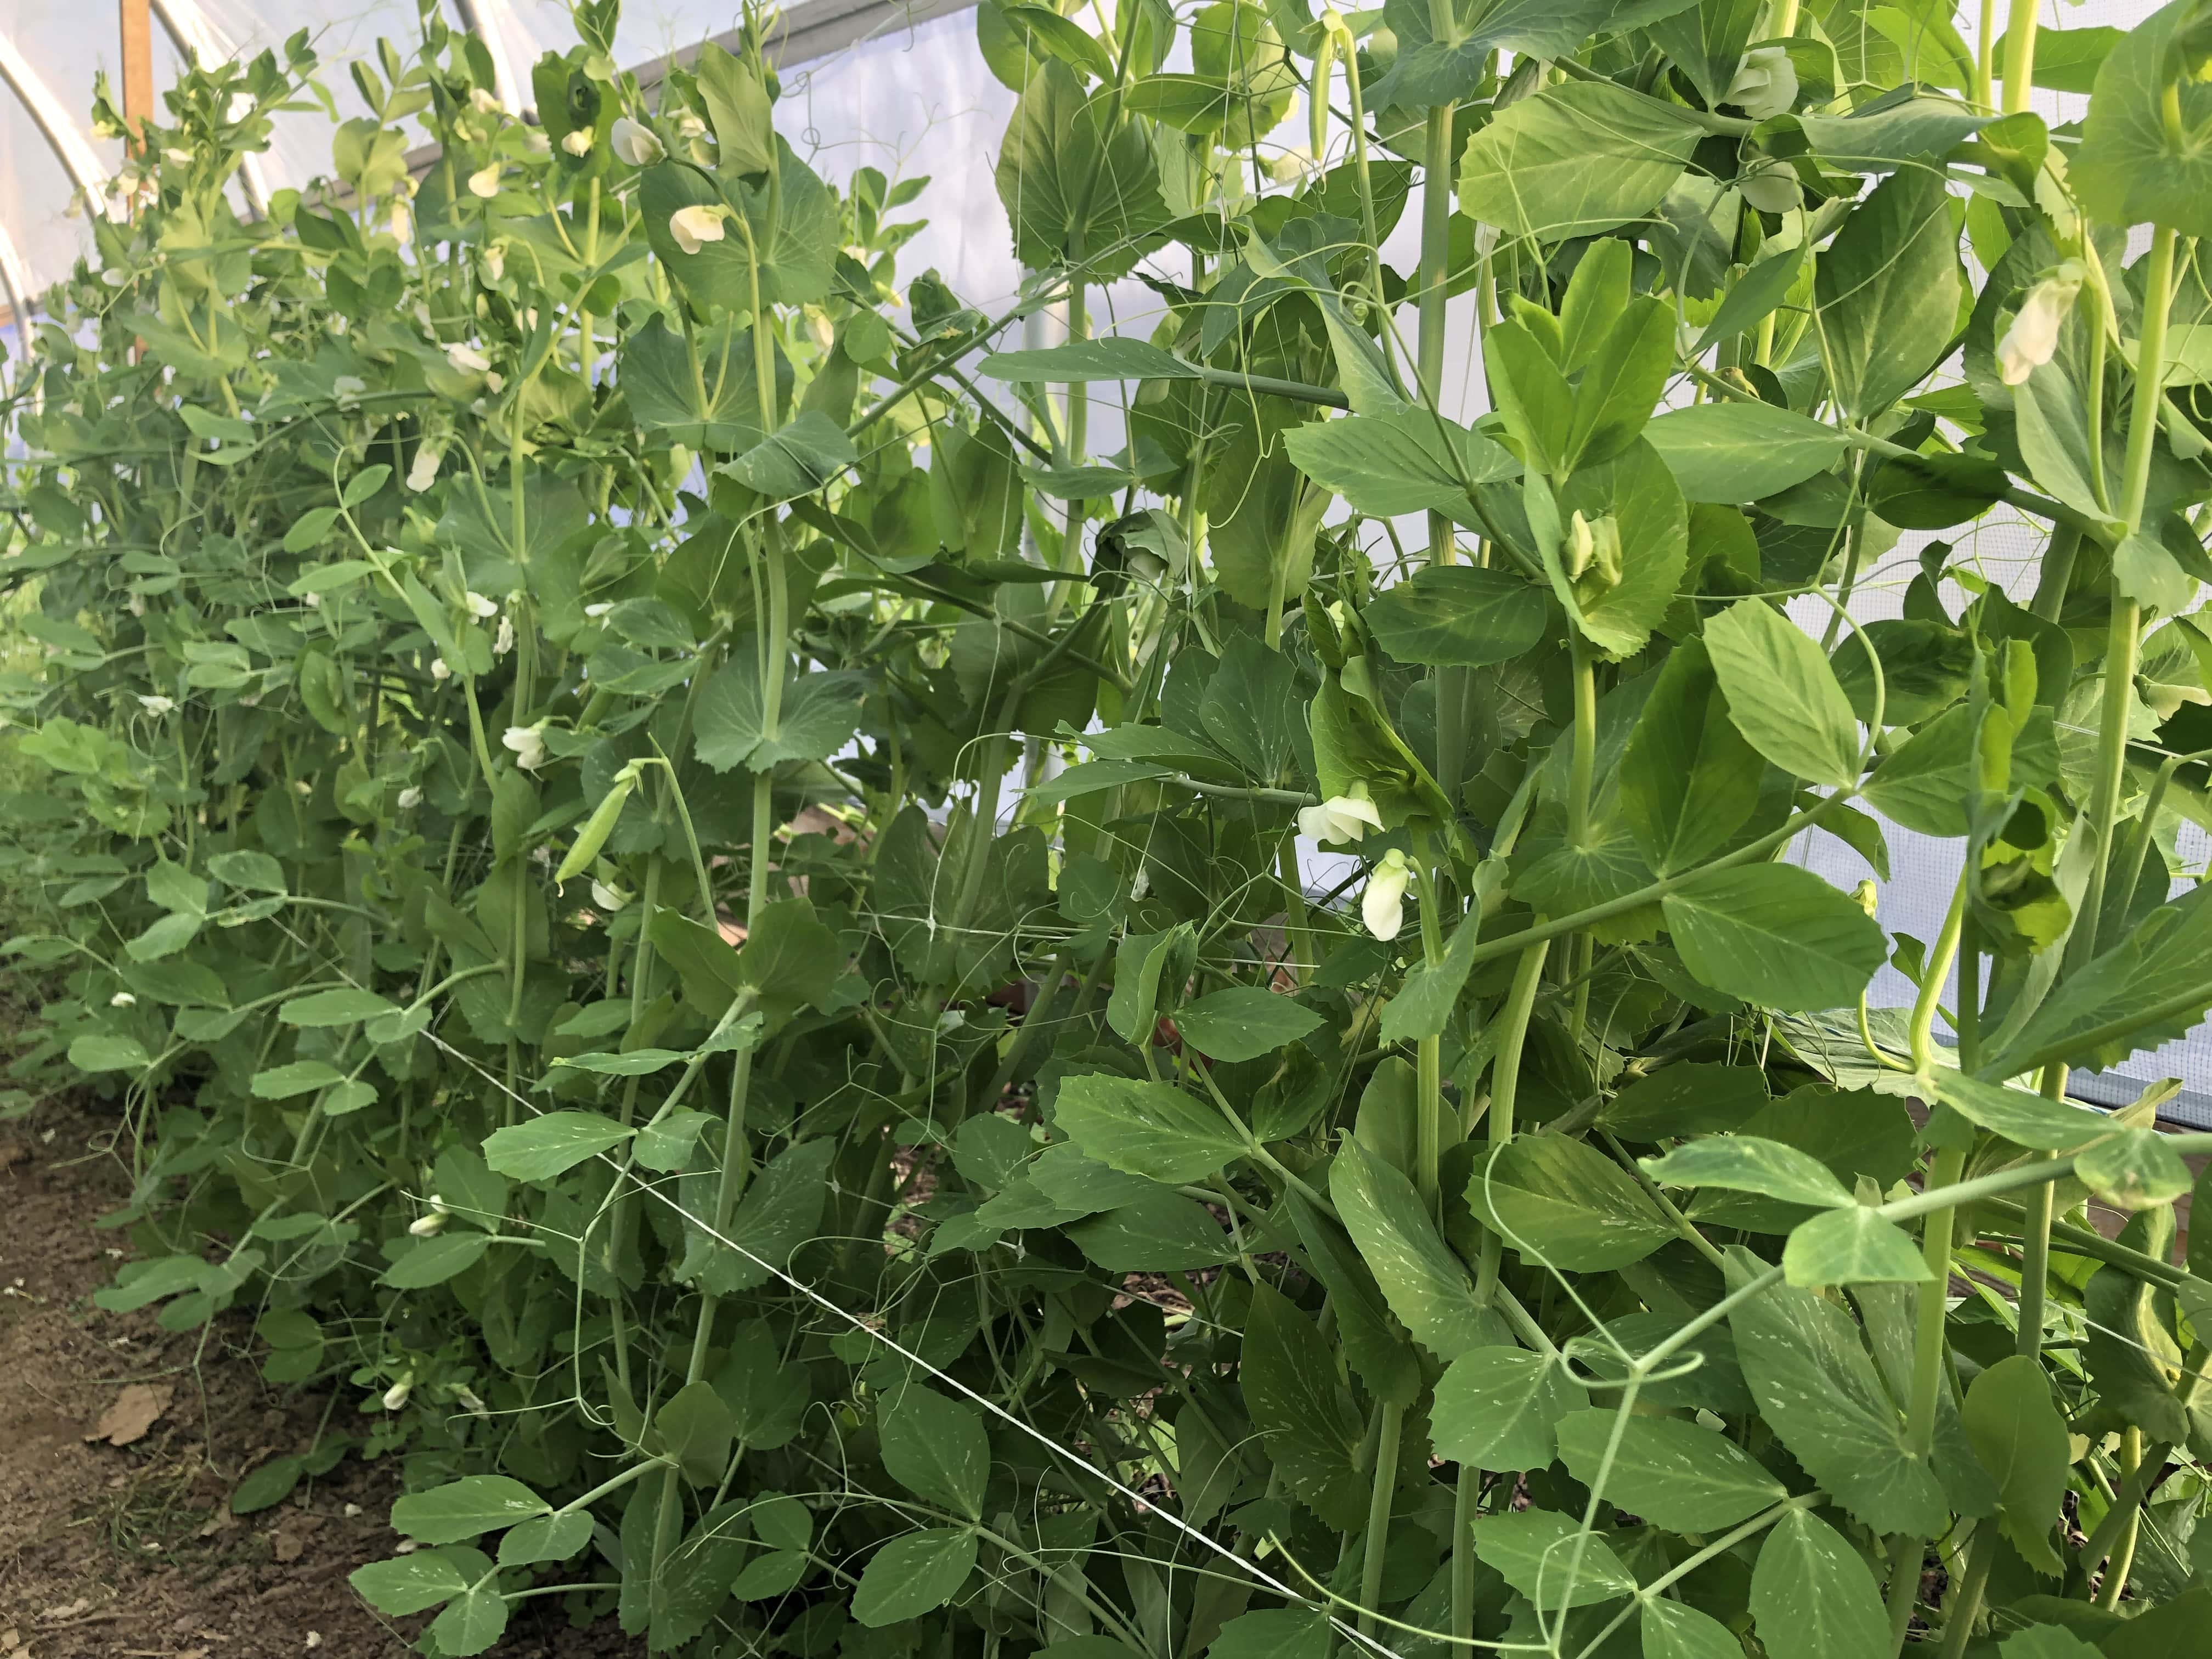 snap pea plants growing up a thin white trellis. Lots of white flowers and a couple snap peas also visible on the plants.